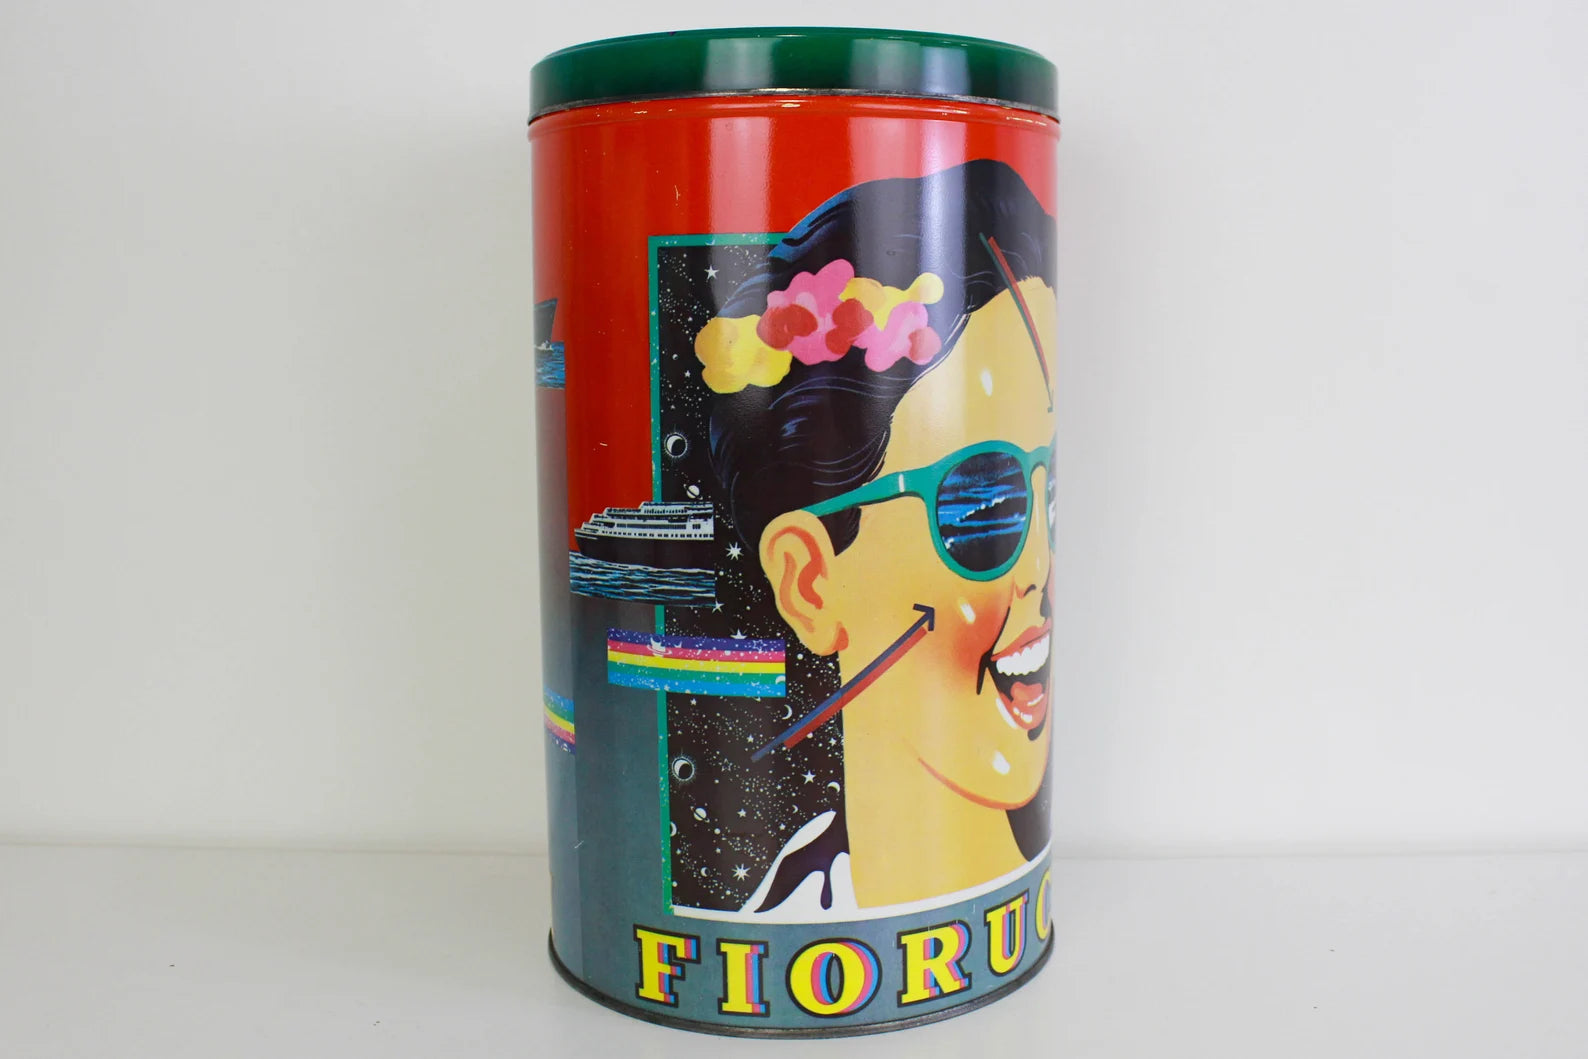 1970s Fiorucci Can "The Maui Chip", Vintage Fiorucci Tin Canister, Collectible Memoribilia, Fiorucci Andy Warhol Pop Art Style Metal Can